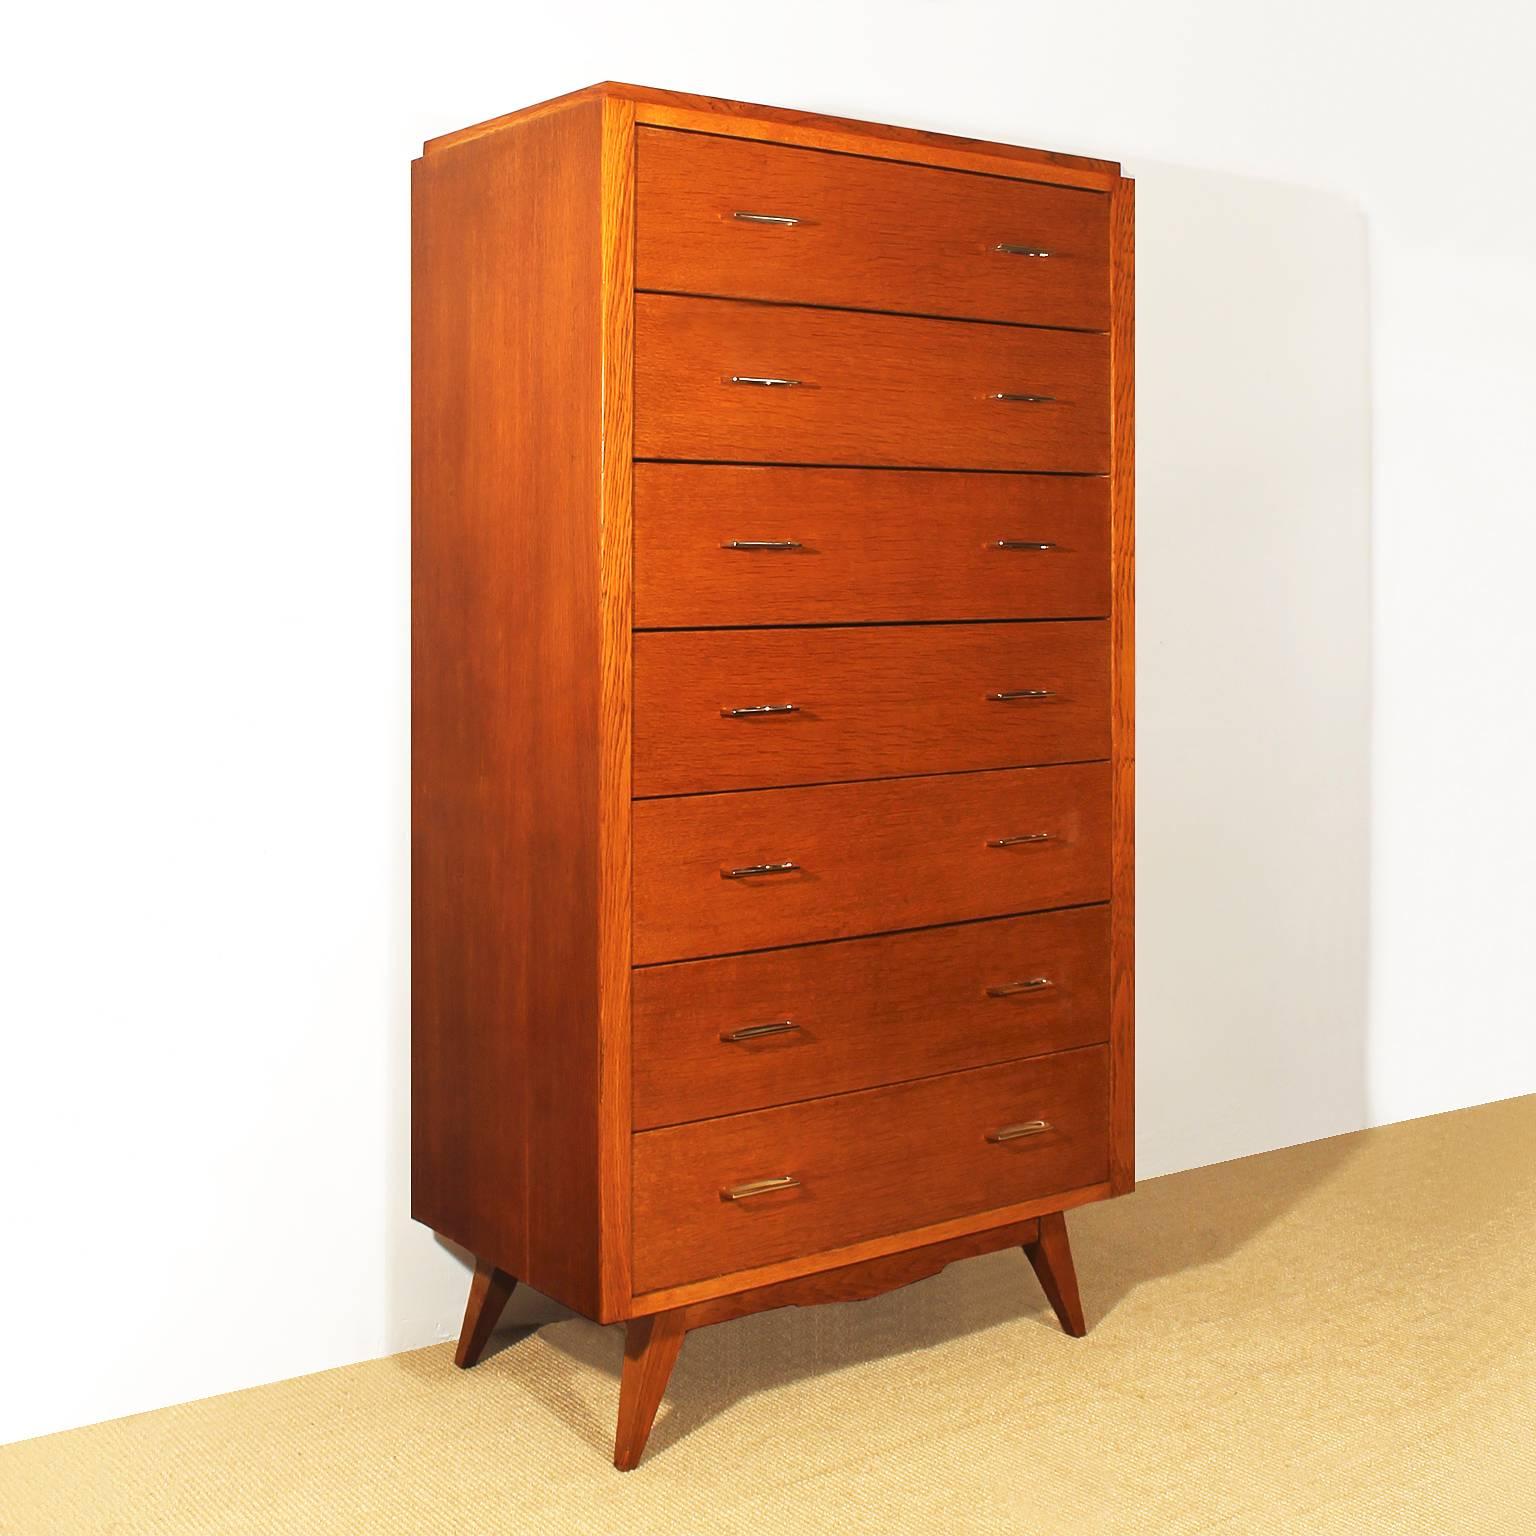 Important "semainier" chest of drawers, solid oakwood, French polish, polished aluminium handles, high quality,
France, circa 1950.